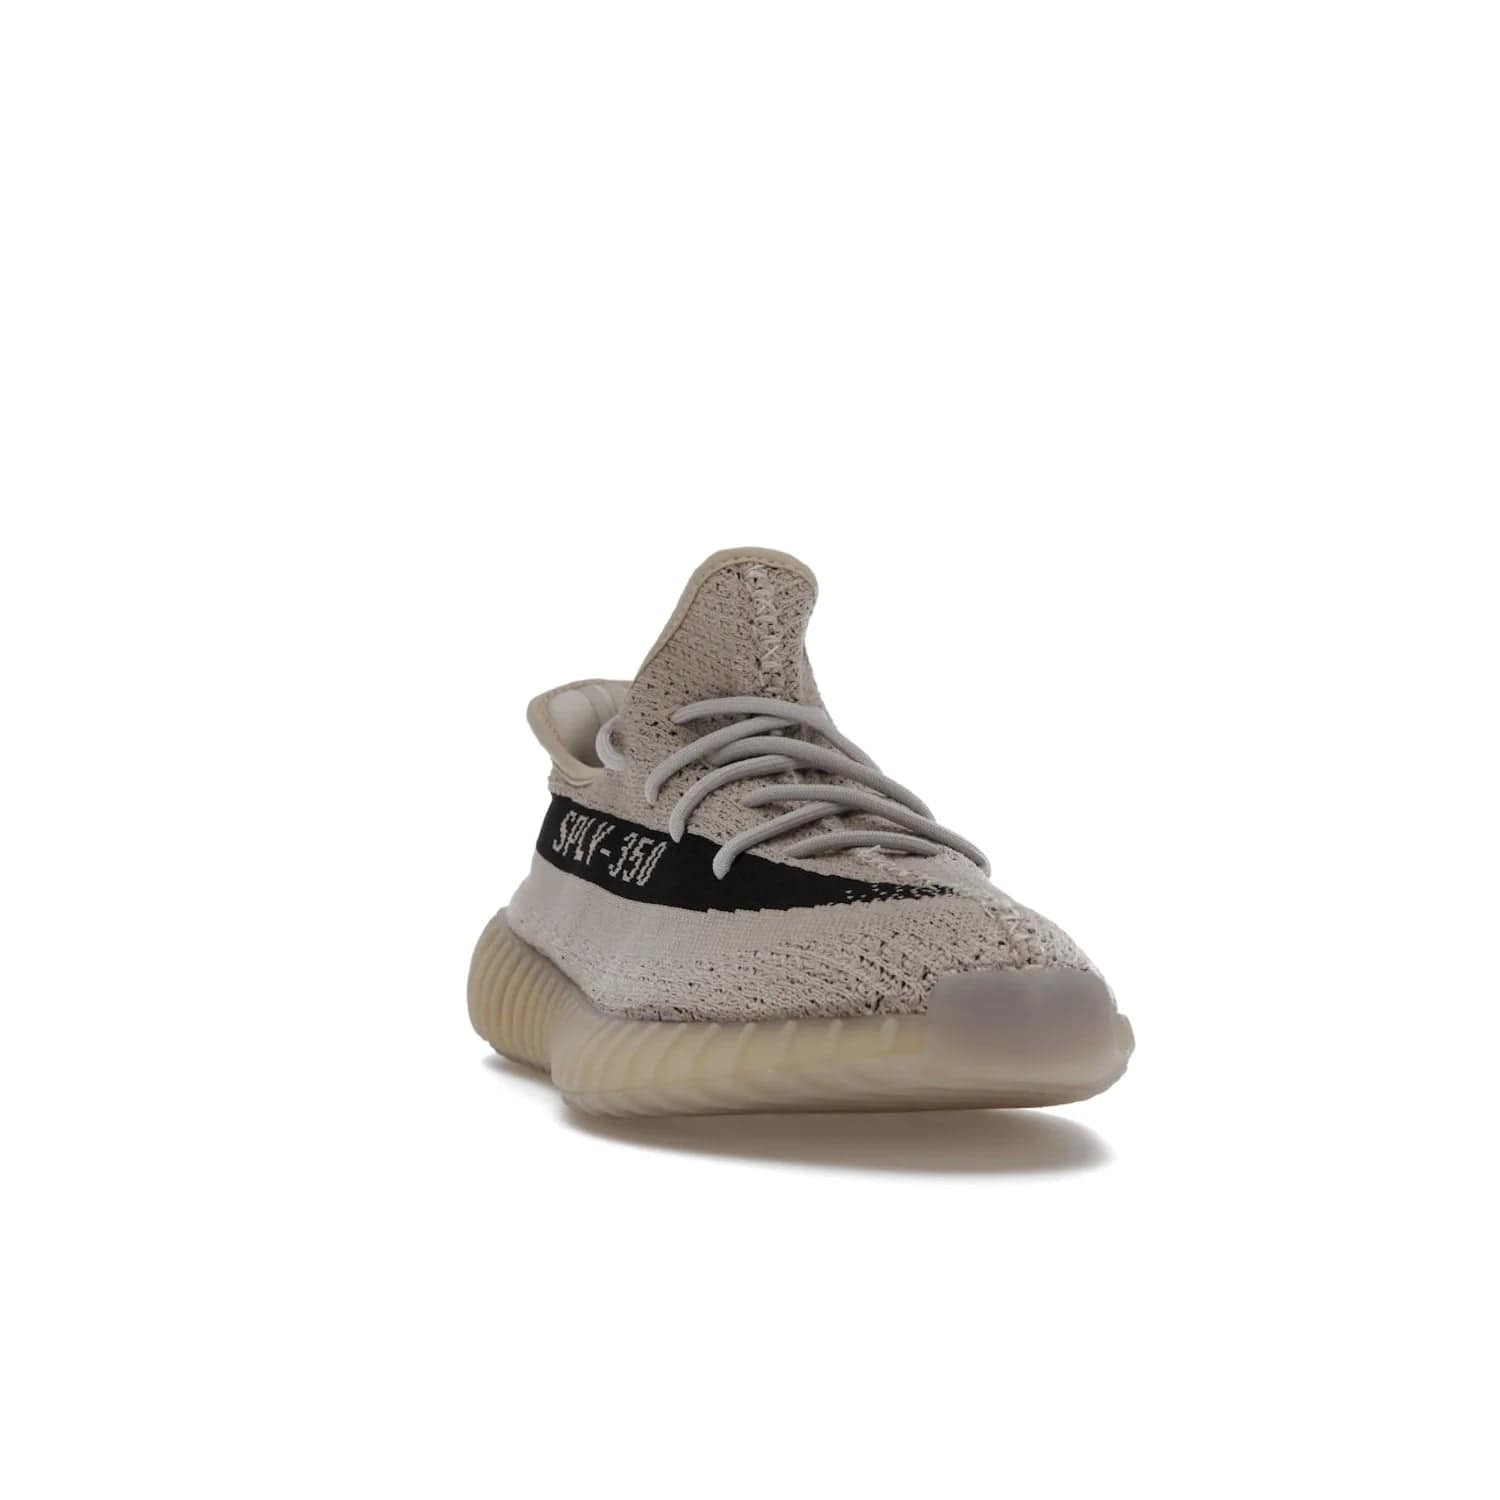 adidas Yeezy Boost 350 V2 Slate - Image 8 - Only at www.BallersClubKickz.com - Adidas Yeezy Boost 350 V2 Slate Core Black Slate featuring Primeknit upper, Boost midsole and semi-translucent TPU cage. Launched on 3/9/2022, retailed at $230.